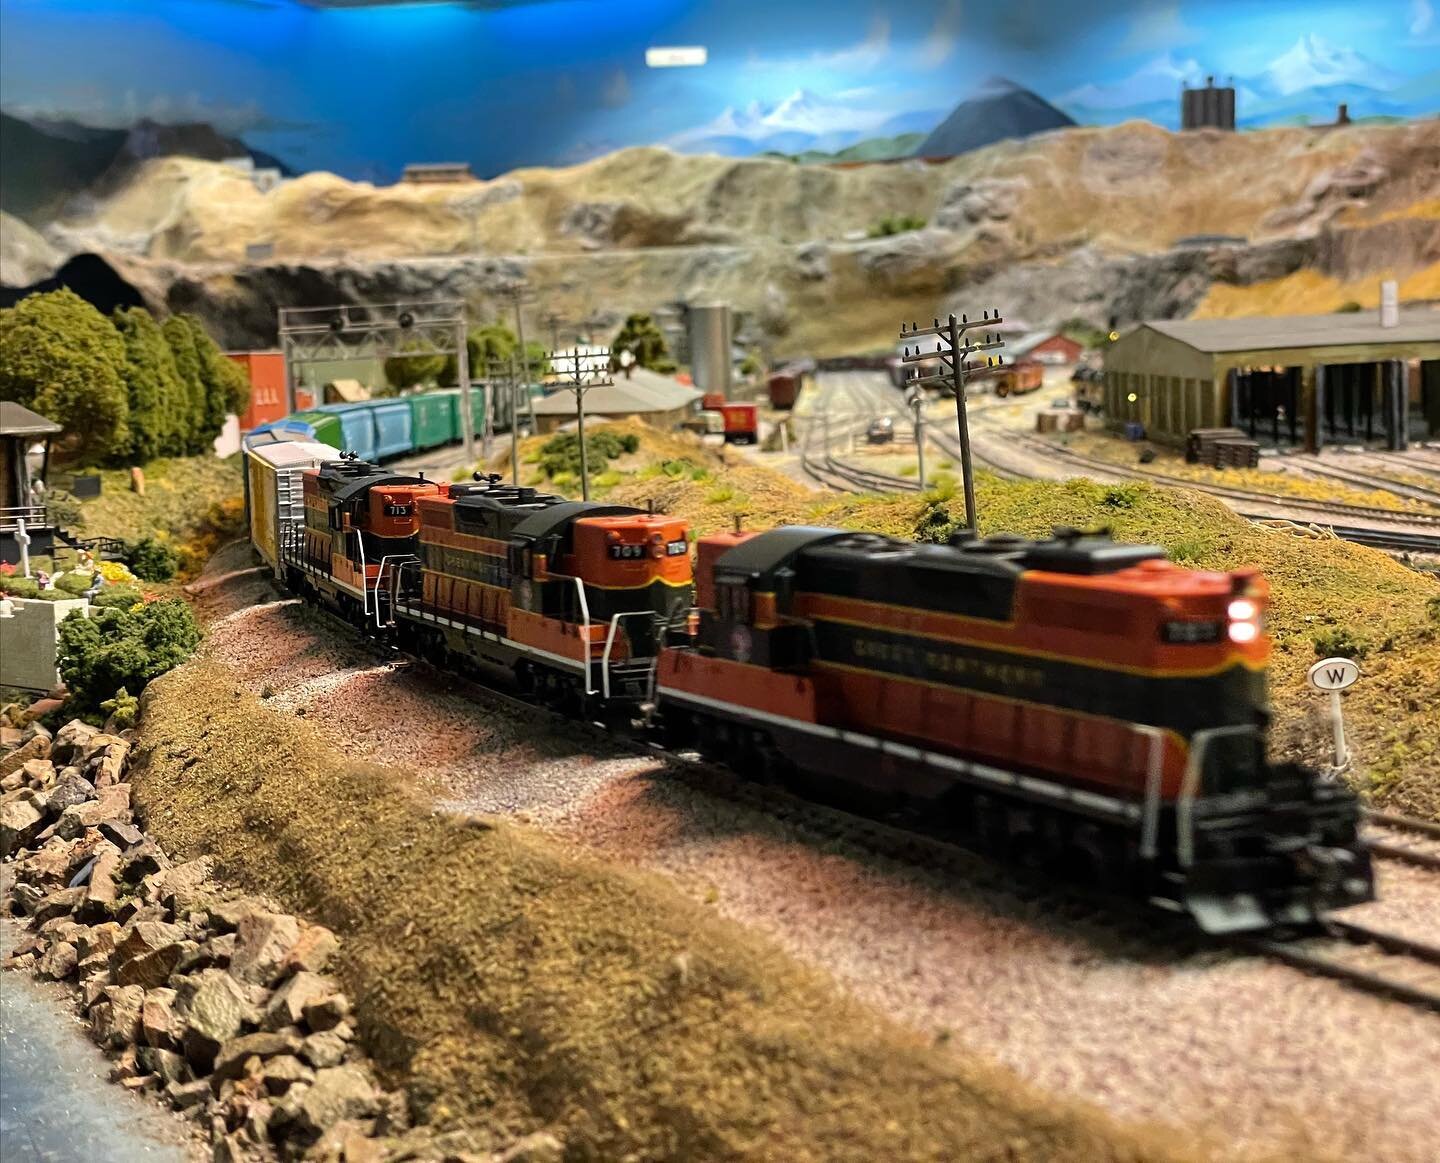 We are gearing up for our November Show! Over the next several weeks we will be making final preparations on the layout and training our members. Want to attend the November show? Get your tickets online today and reserve your spot! See link below👇?